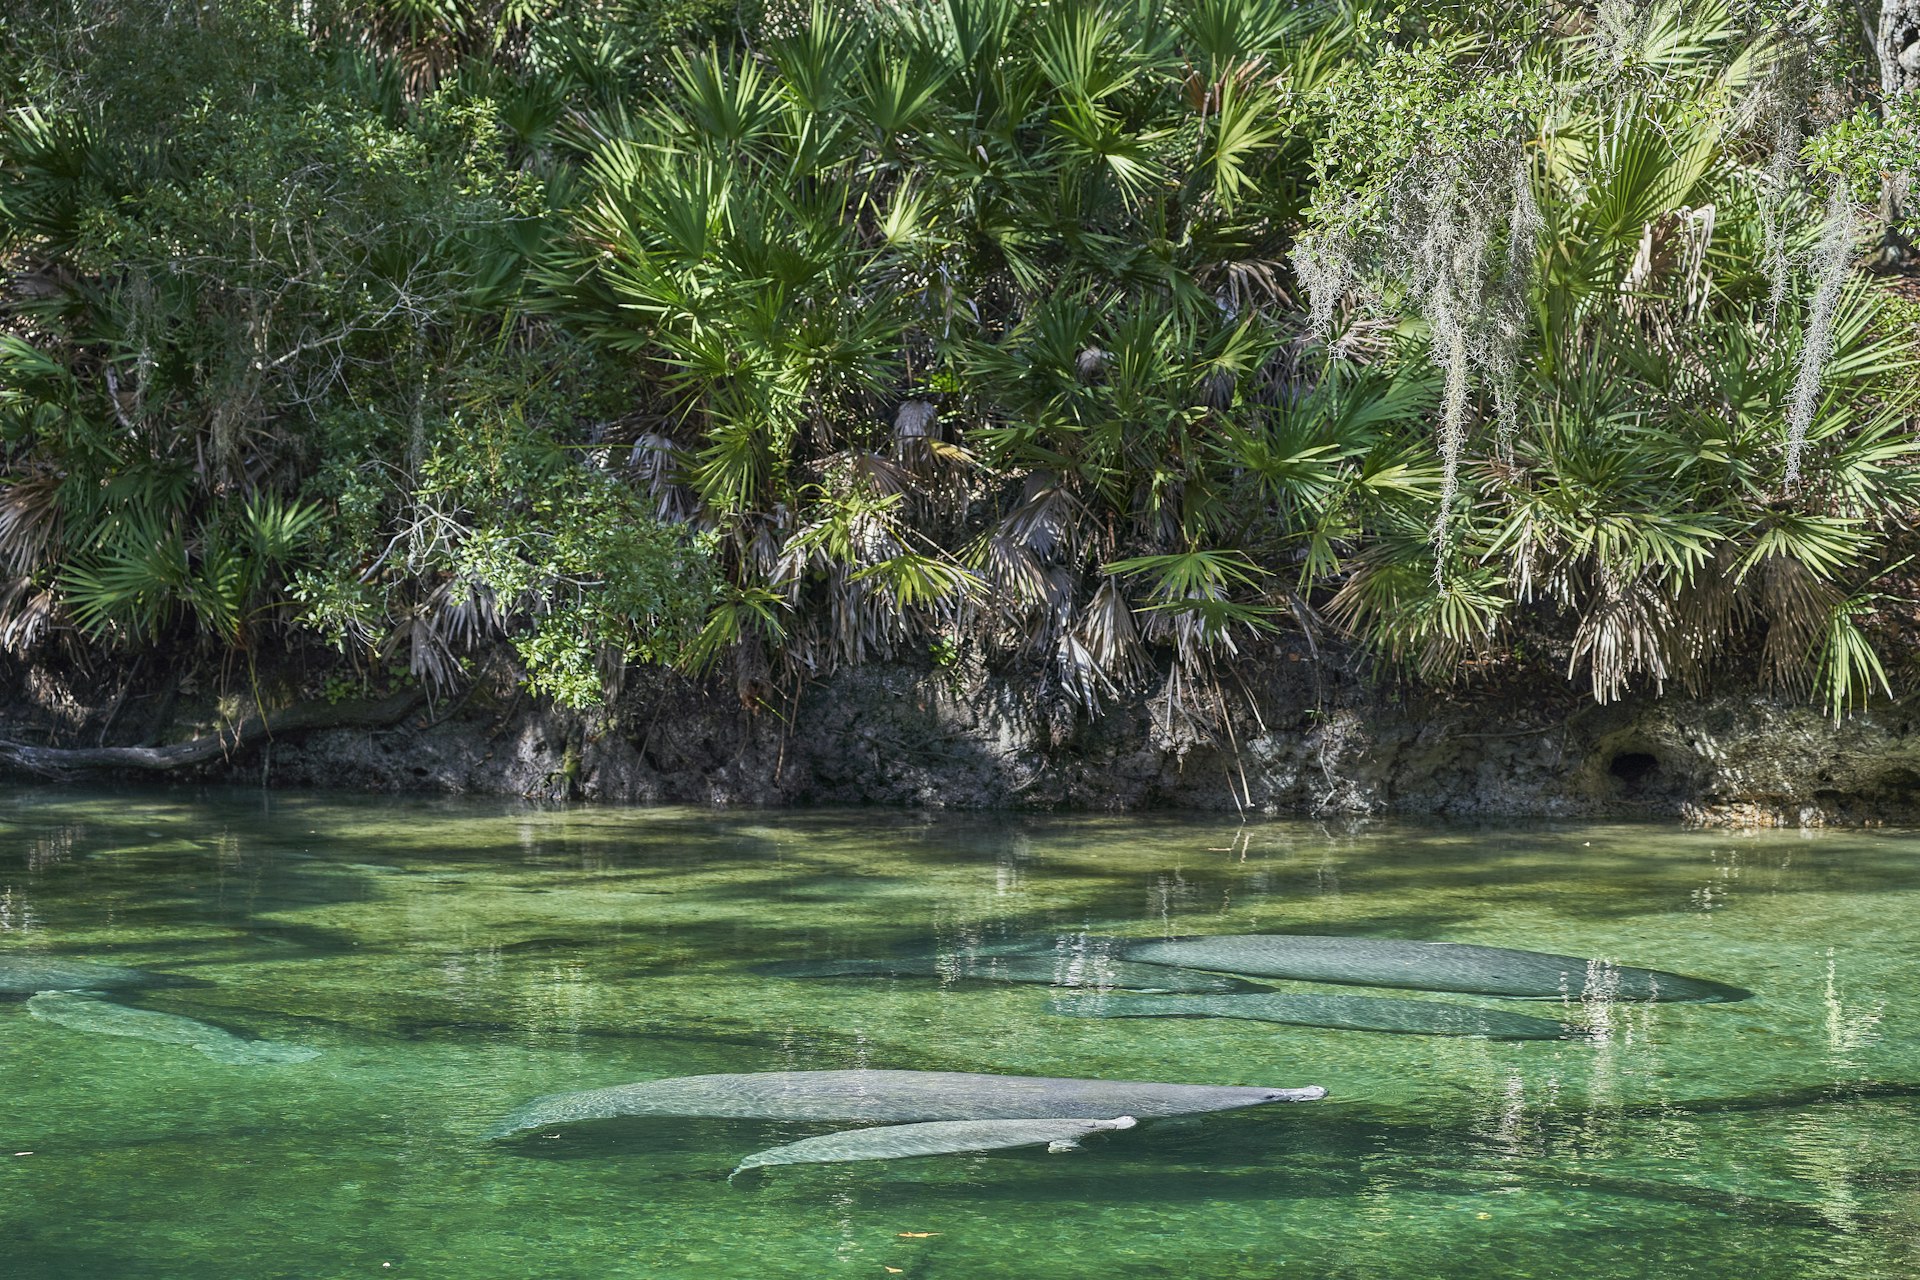 Manatees float in clear water at Blue Spring State Park outside of Orlando, Florida